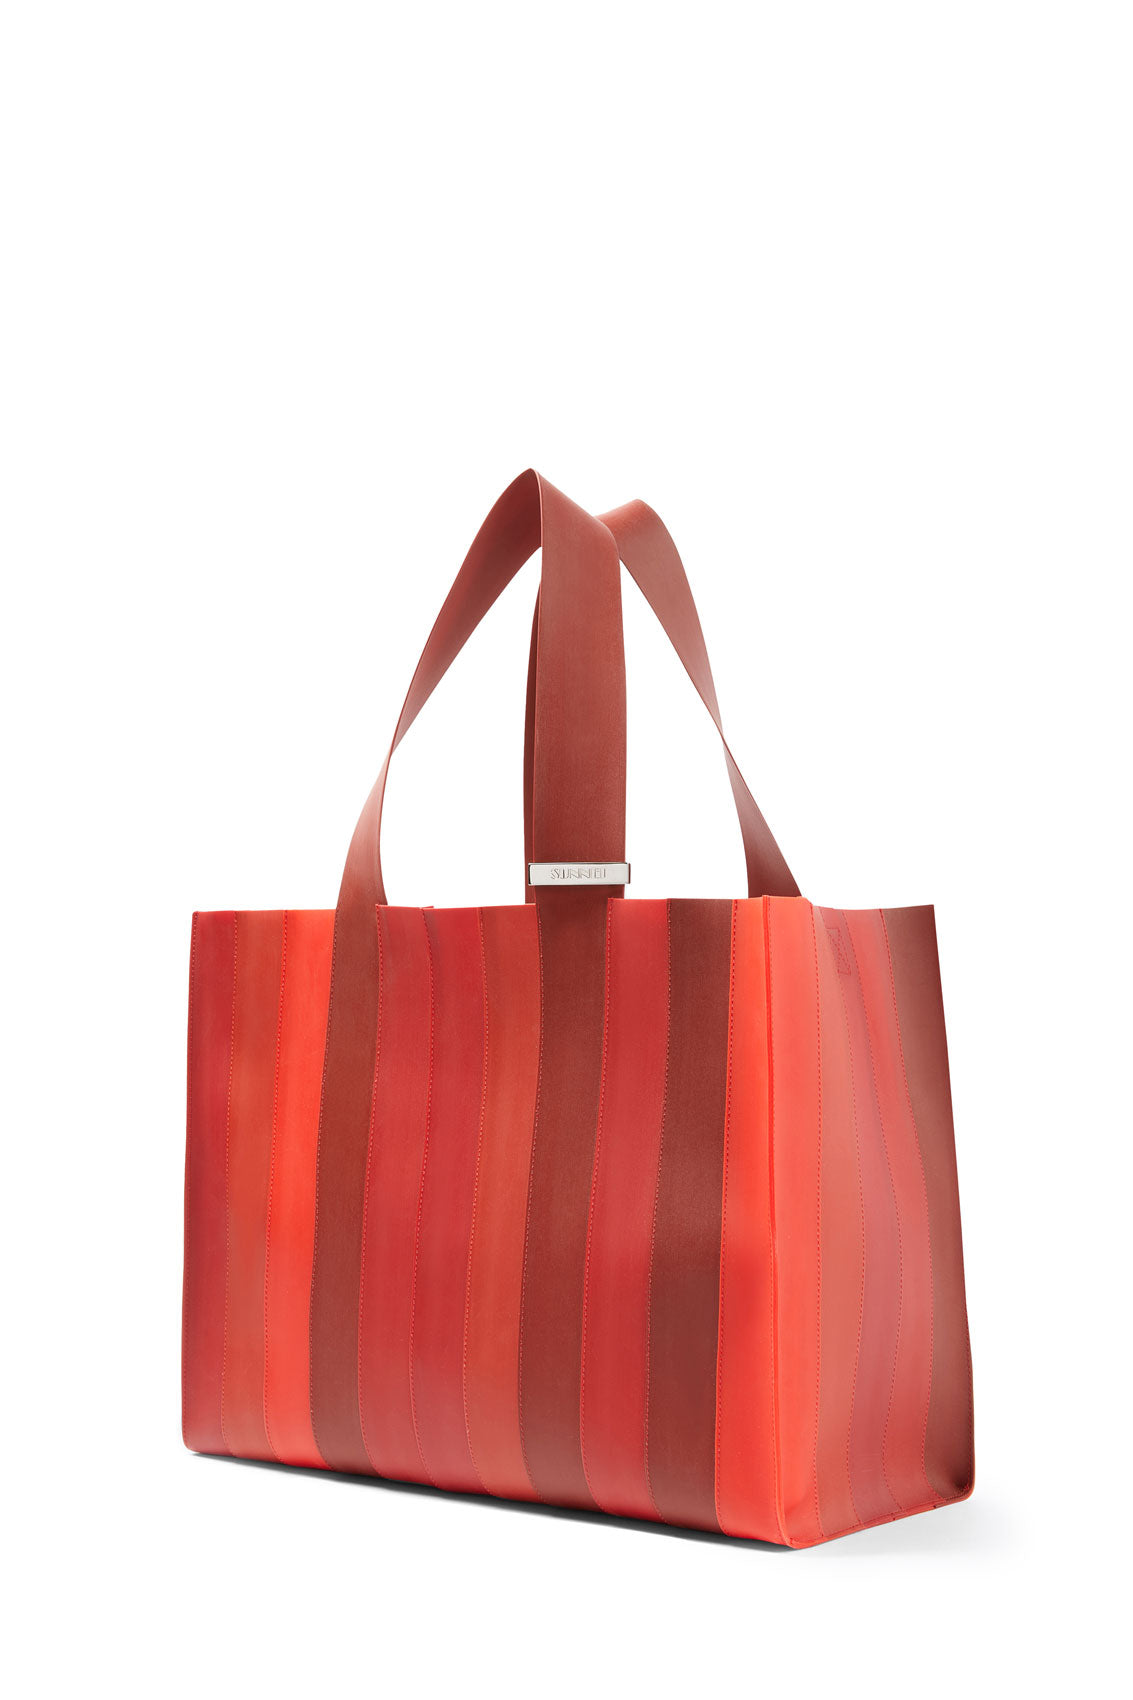 GRADIENT RED PUDDING PARALLELEPIPEDO BAG